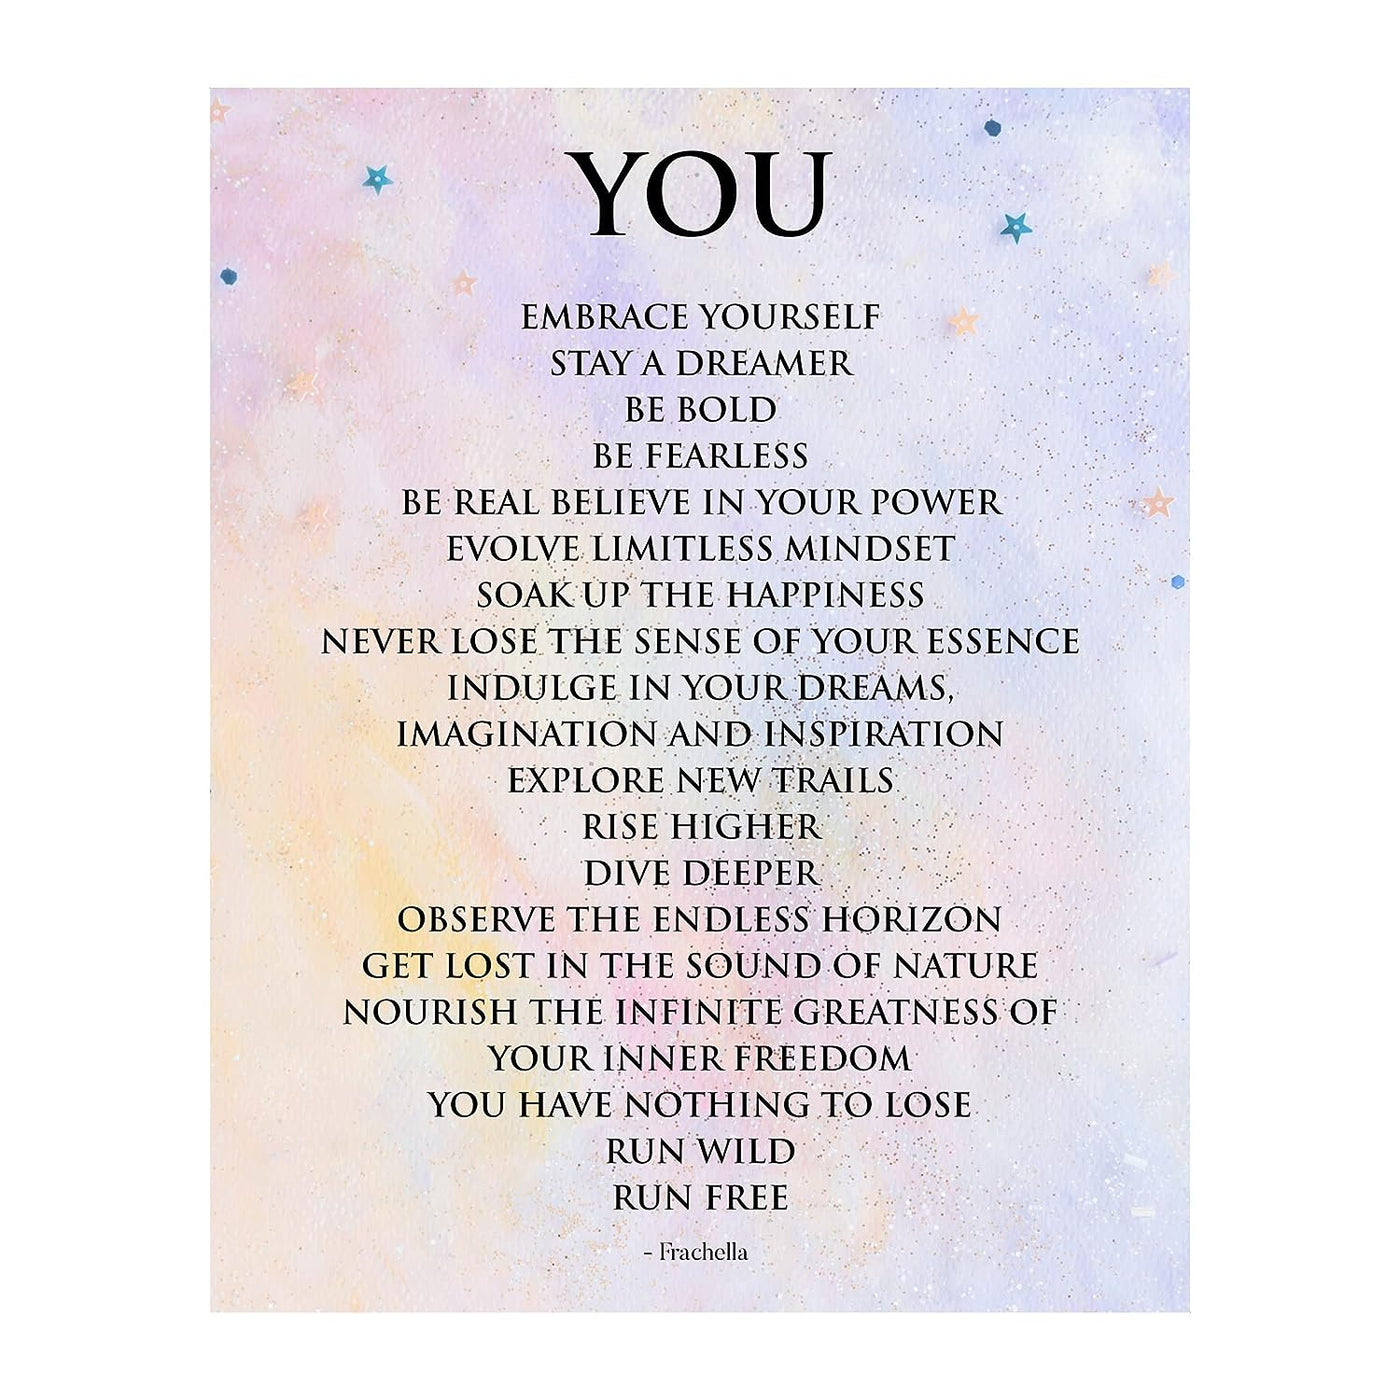 You-Embrace Yourself-Stay A Dreamer-Inspirational Wall Art Sign -8 x 10" Motivational Typographic Wall Print-Ready to Frame. Positive Home-Office-Studio-Dorm Decor. Great Gift for Inspiration!